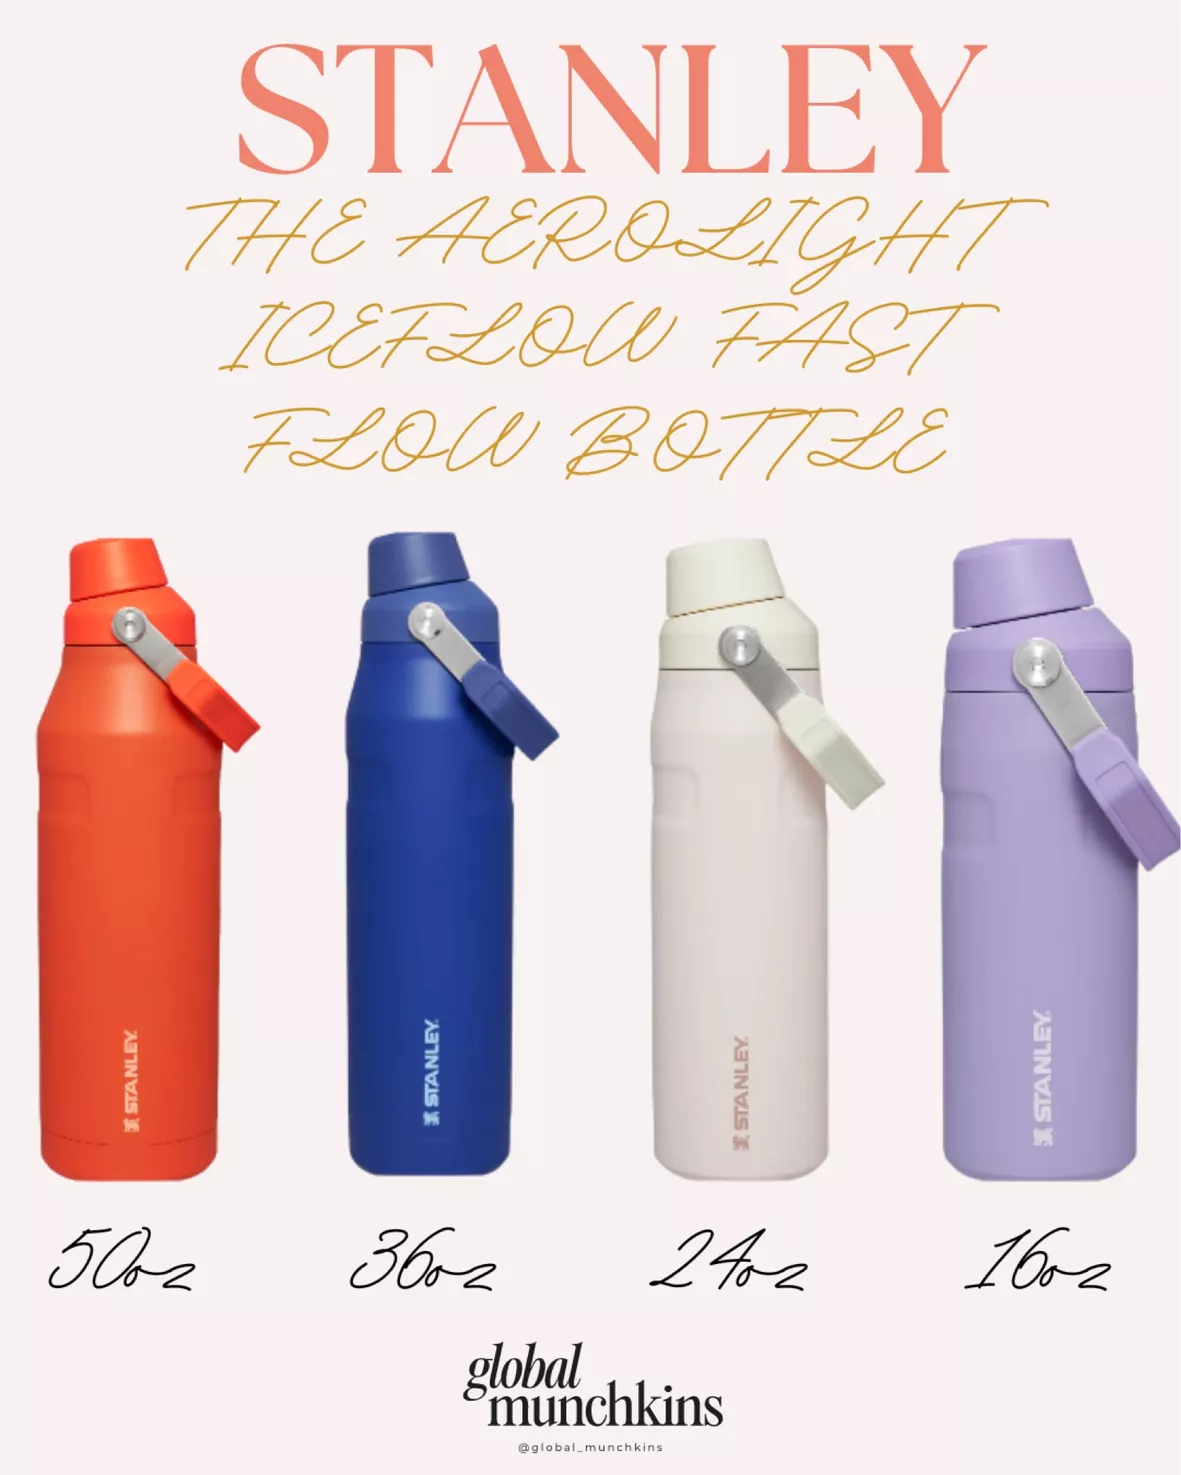 The Aerolight™ IceFlow Bottle curated on LTK